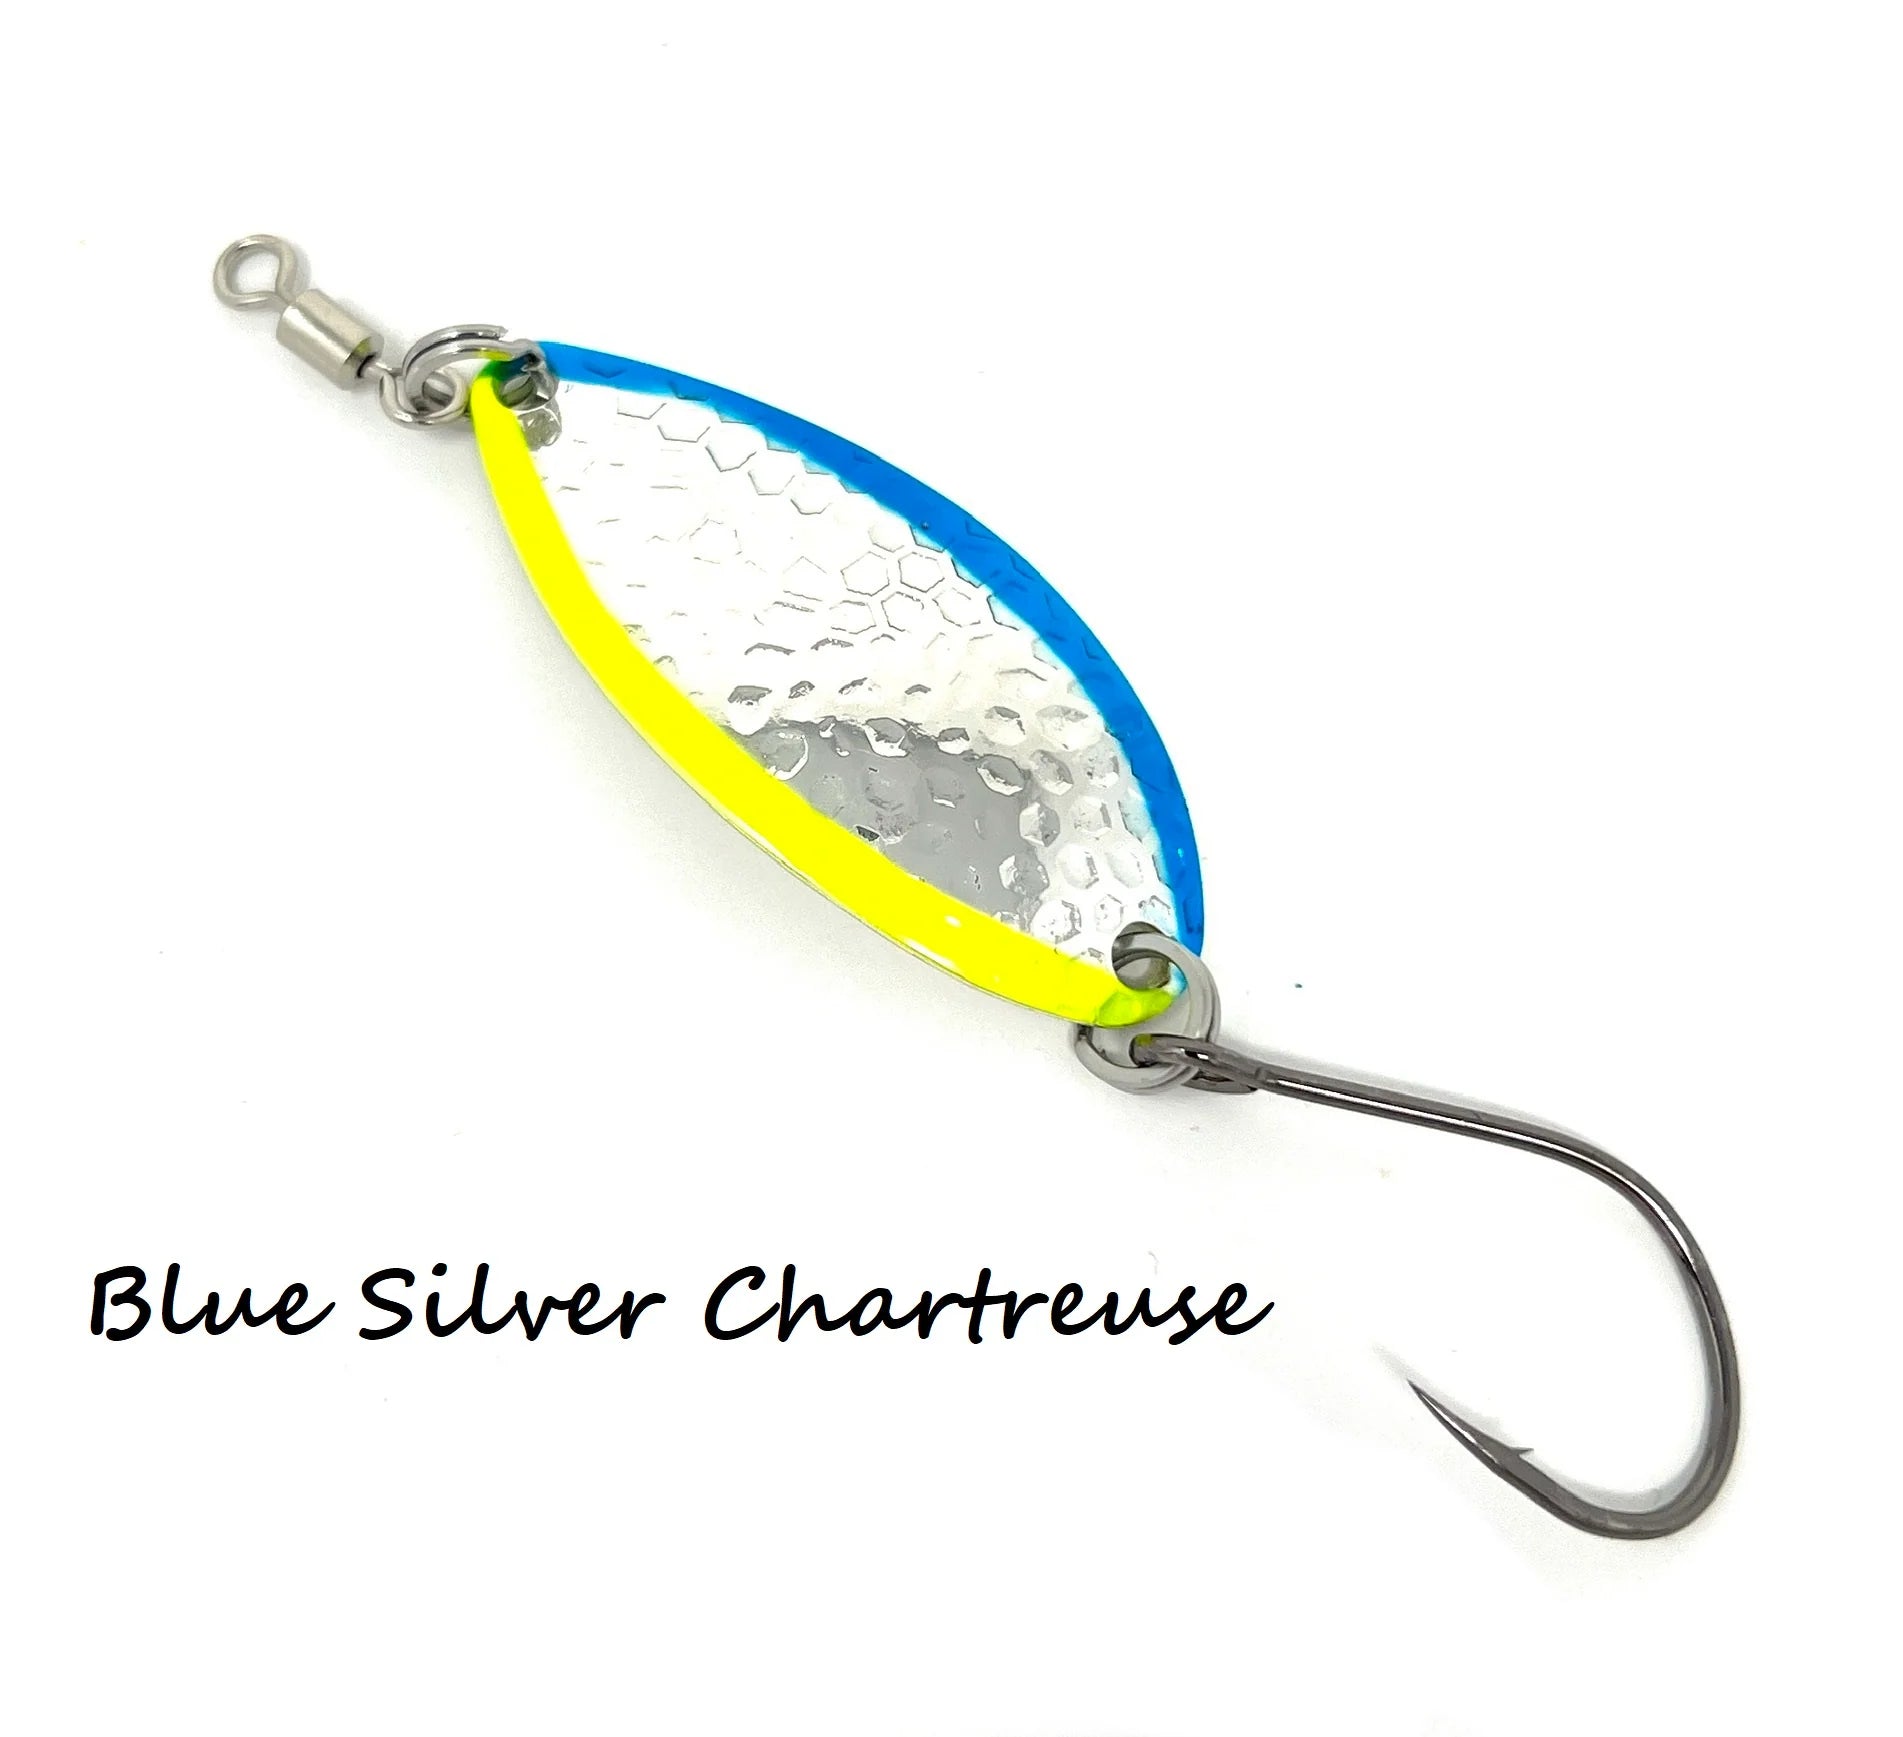 The Glory Spoon By Prime Lures